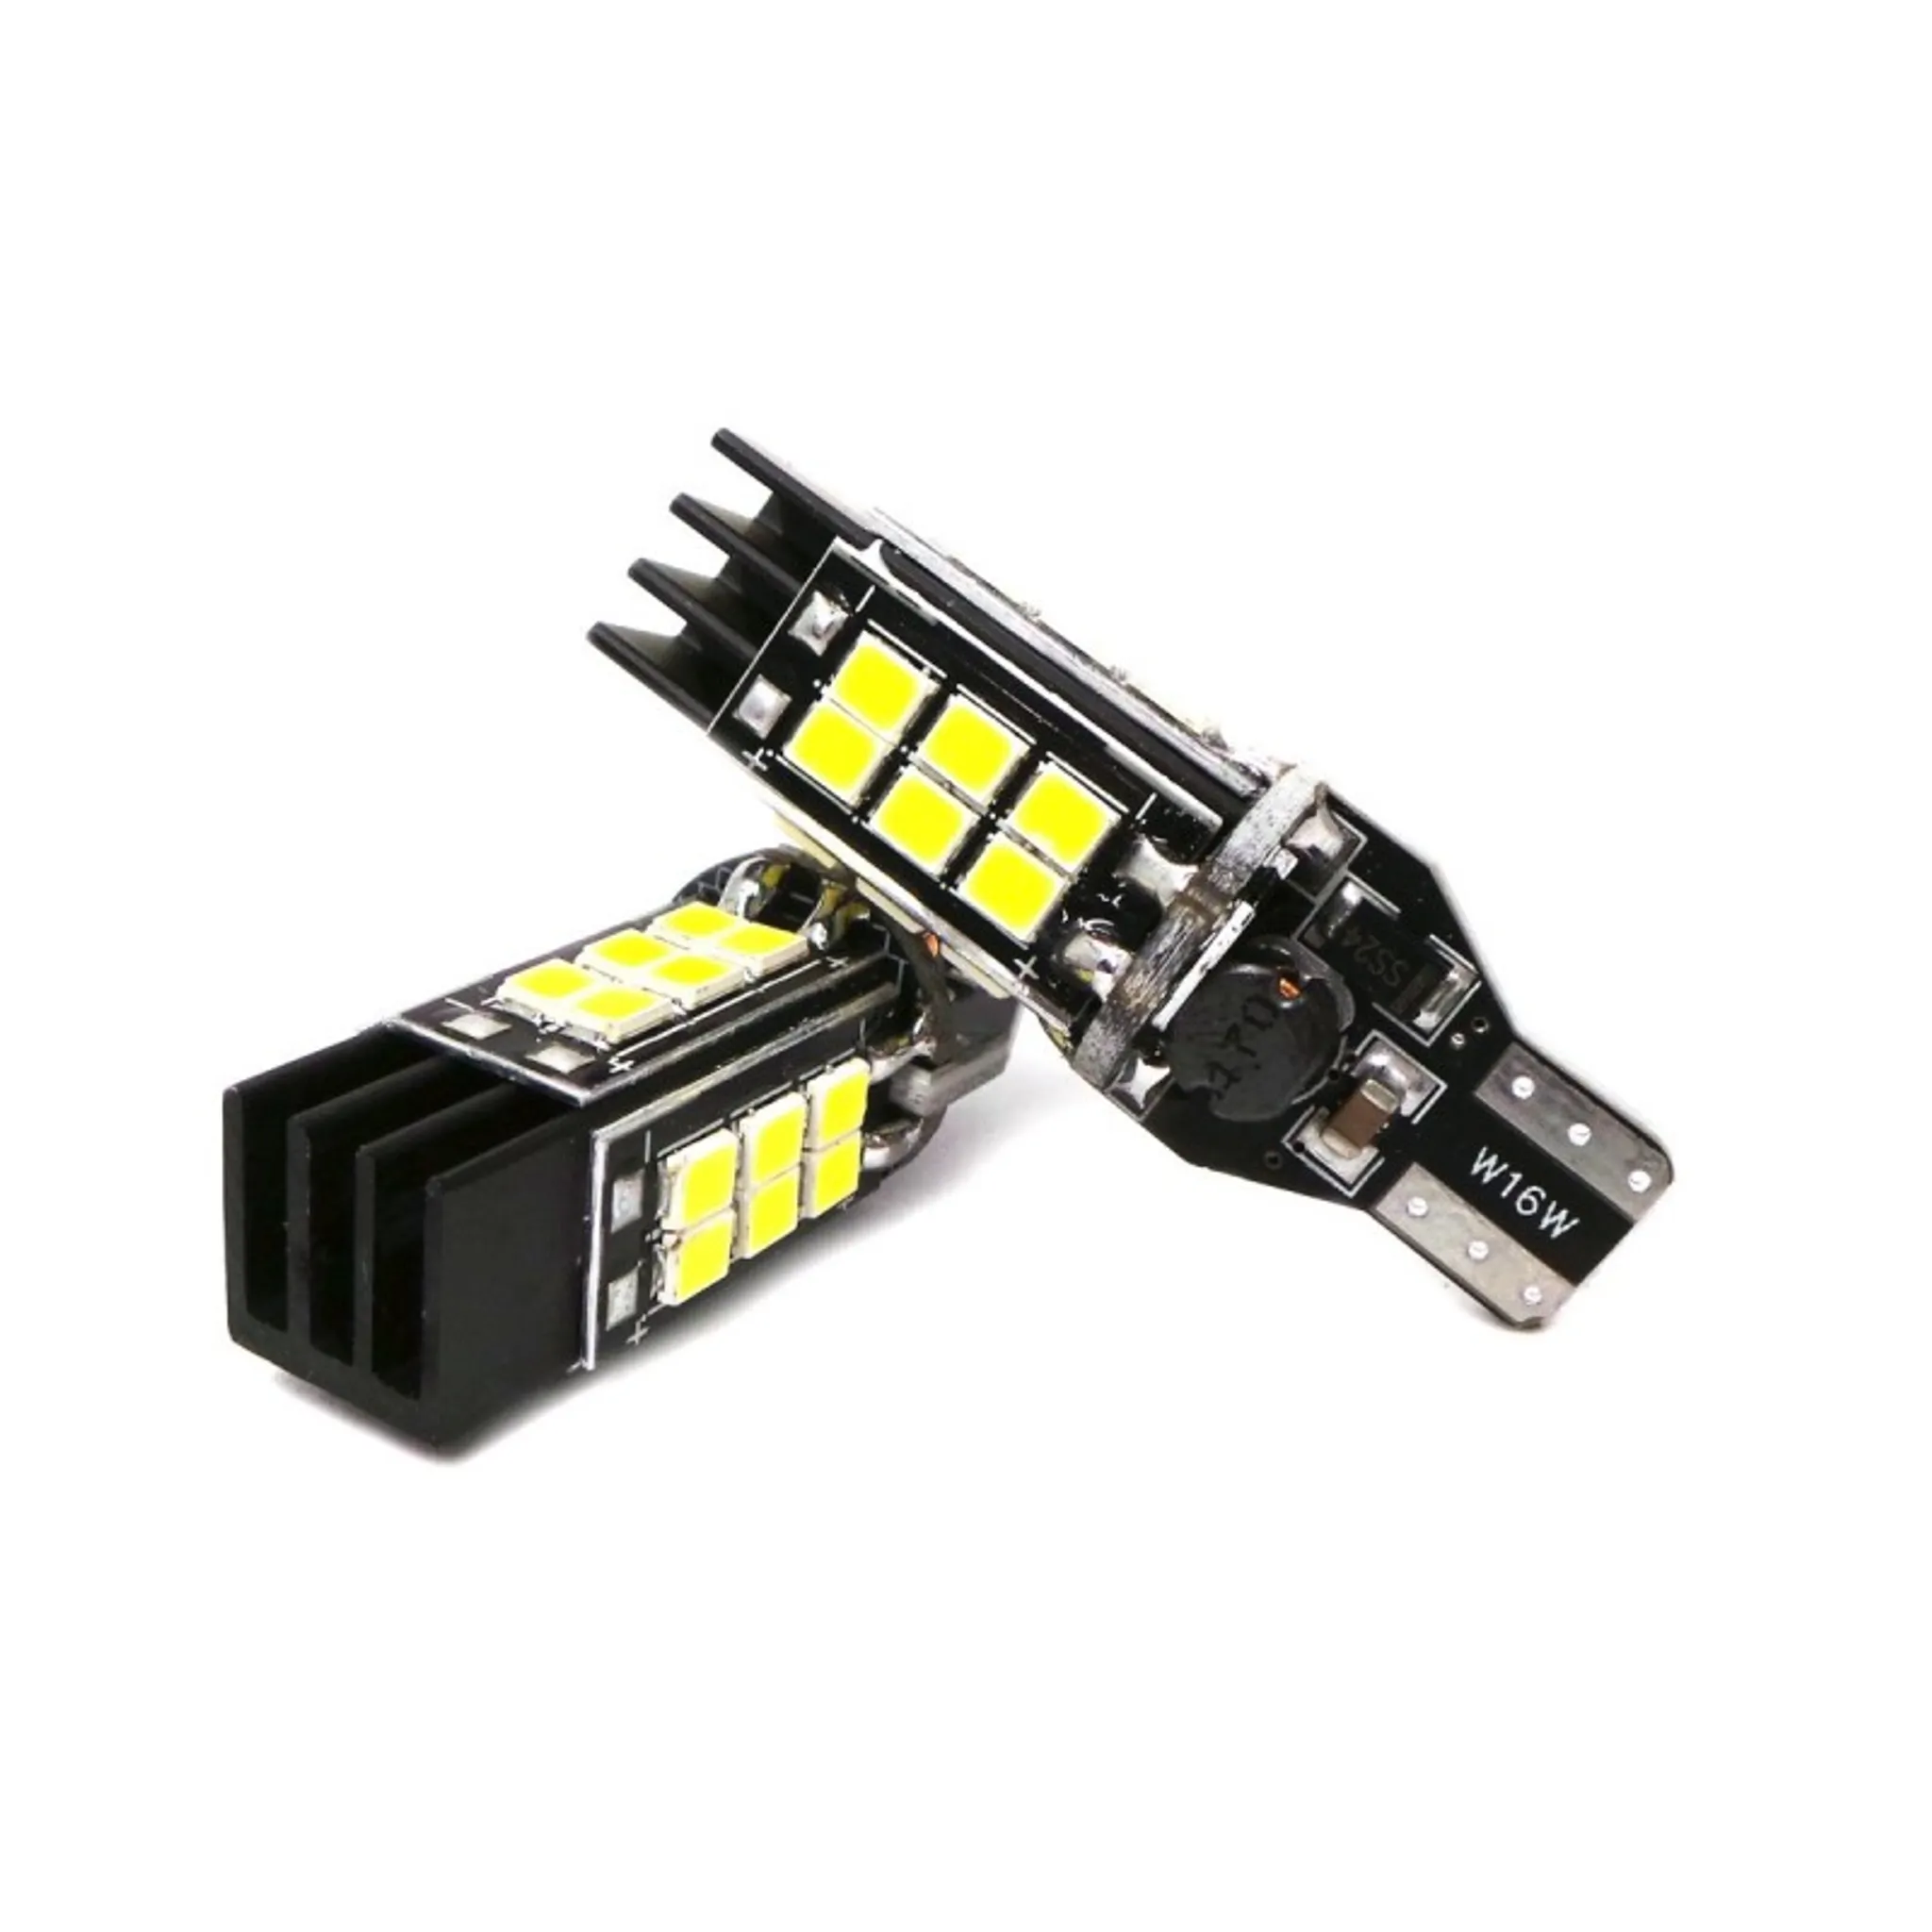 2 x 5 LED SMD CANBUS GLÜHBIRNEN – WEISS – 5 LEDs – T4W